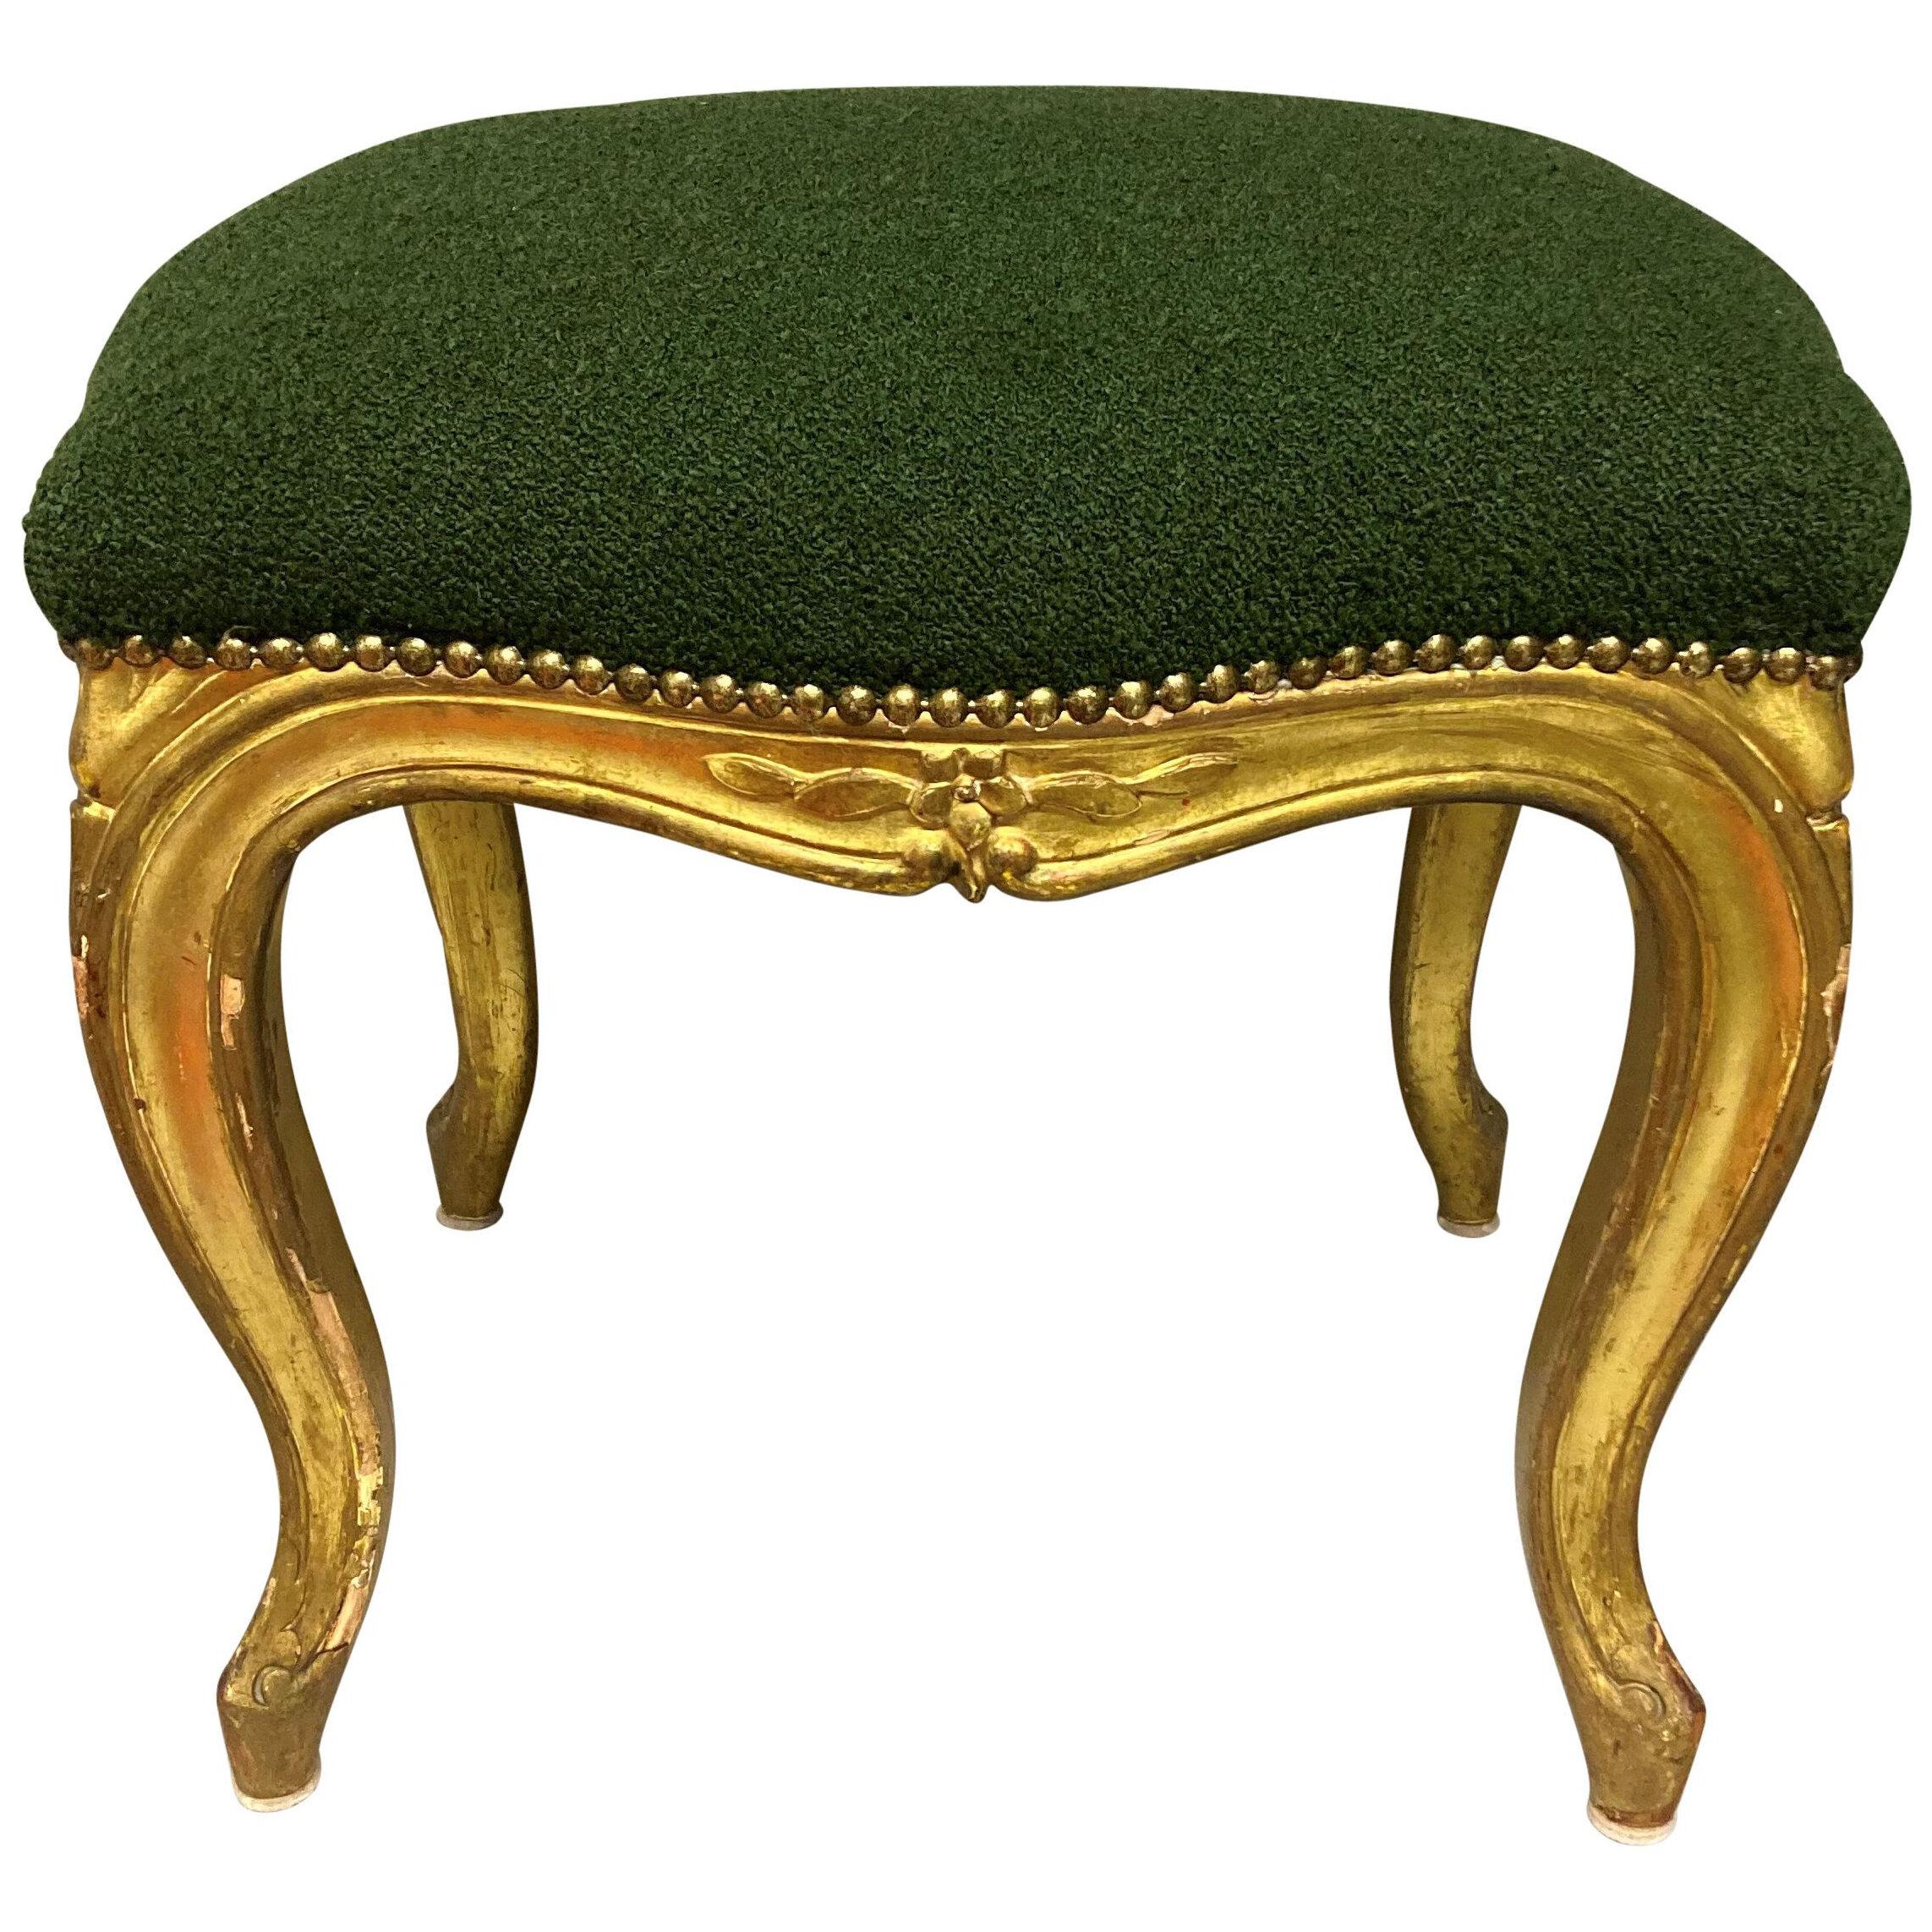 A FRENCH LOUIS XV STYLE GILT WOOD STOOL